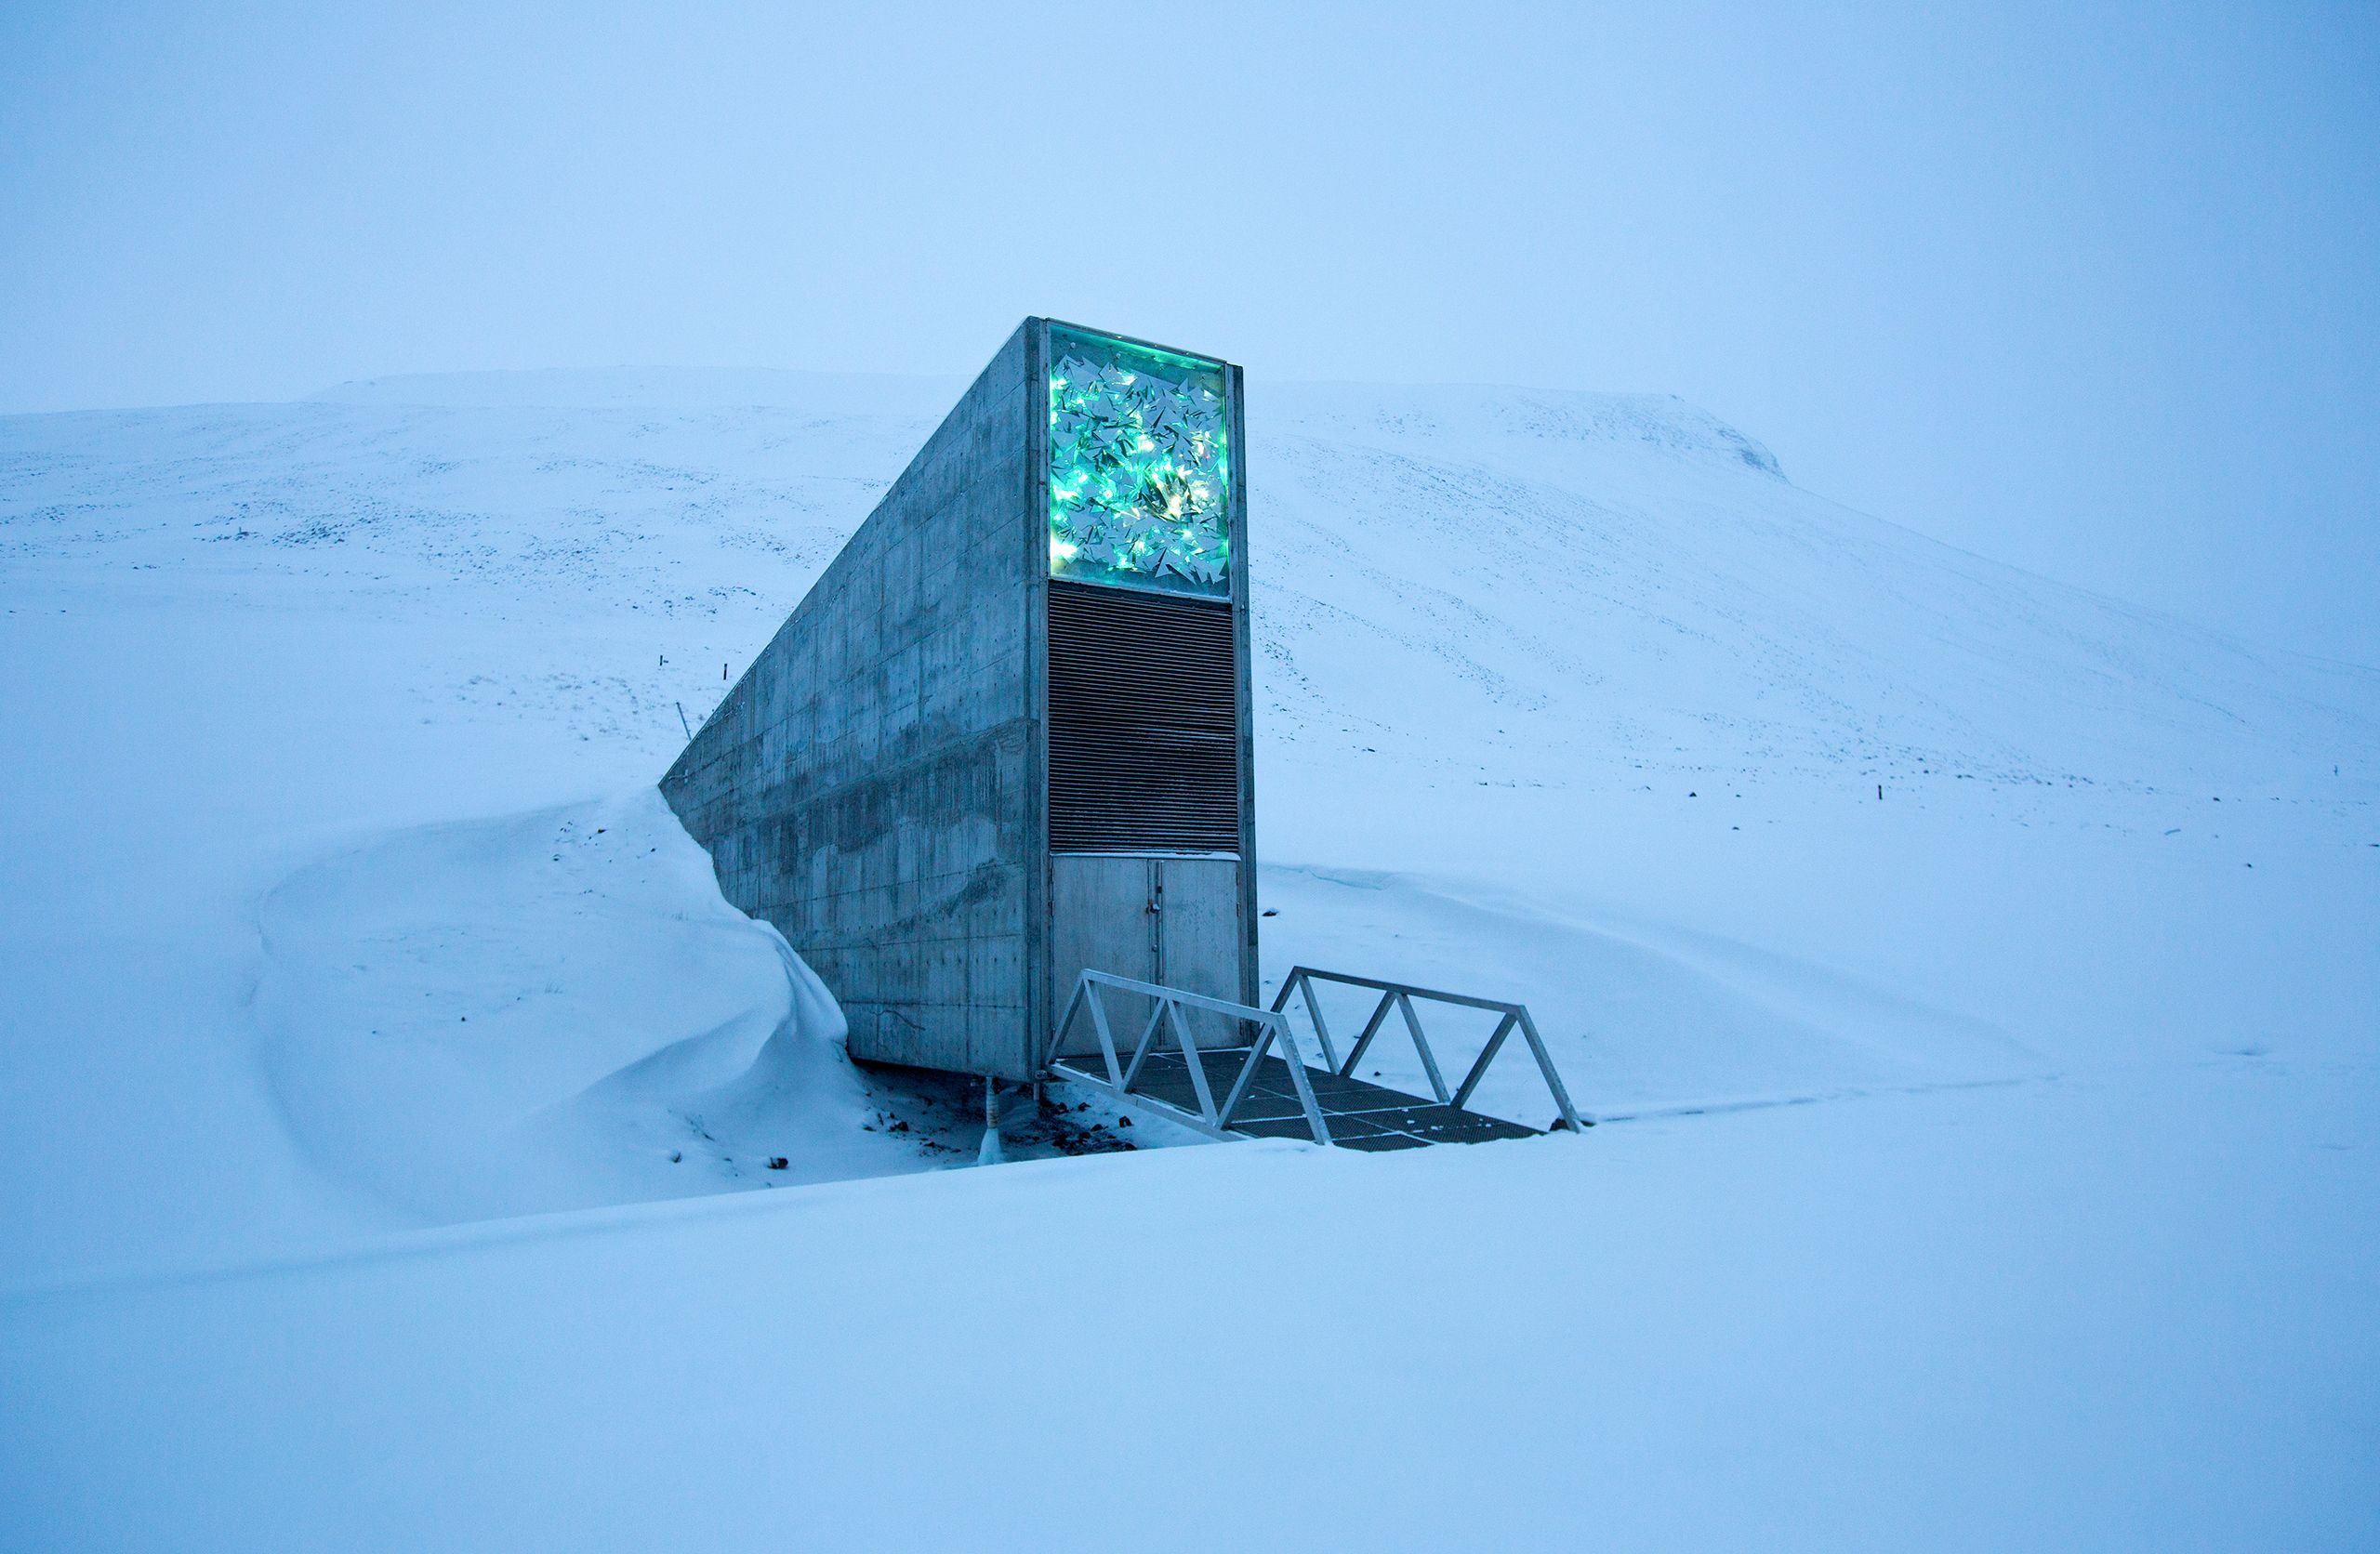 The Global Seed Vault on Spitsbergen, part of Norway’s Svalbard archipelago above the Arctic Circle. Over 930,000 varieties of food crops are stored in its icy depths. Image by Jennifer Duggan. Norway, 2017. 